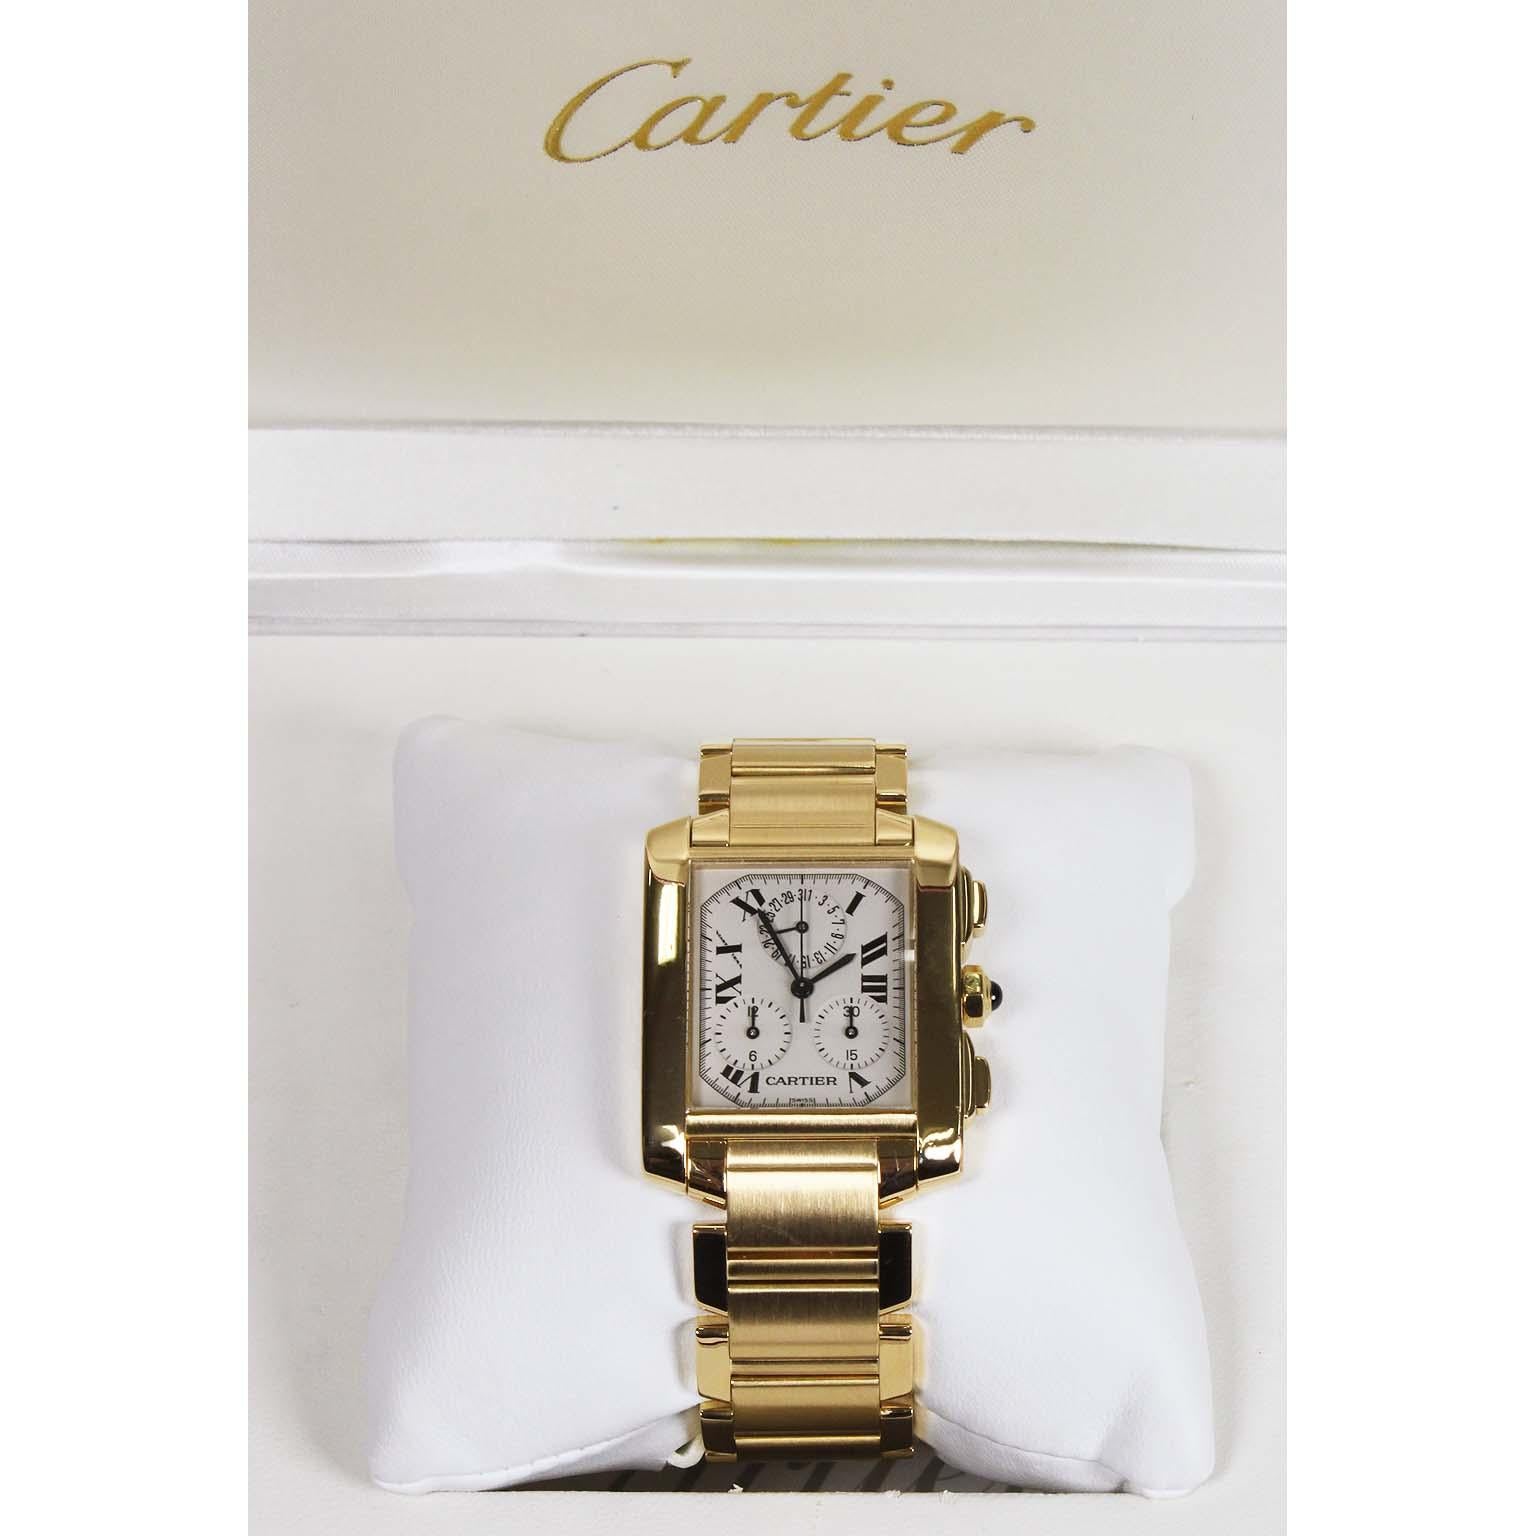 A Cartier yellow gold tank Francaise chronograph quartz wristwatch - Serial No. 1830MG283053

Condition: This watch is in very good pre-owned condition with minor signs of wear. Last serviced at Cartier in Beverly Hills, California on October 21,